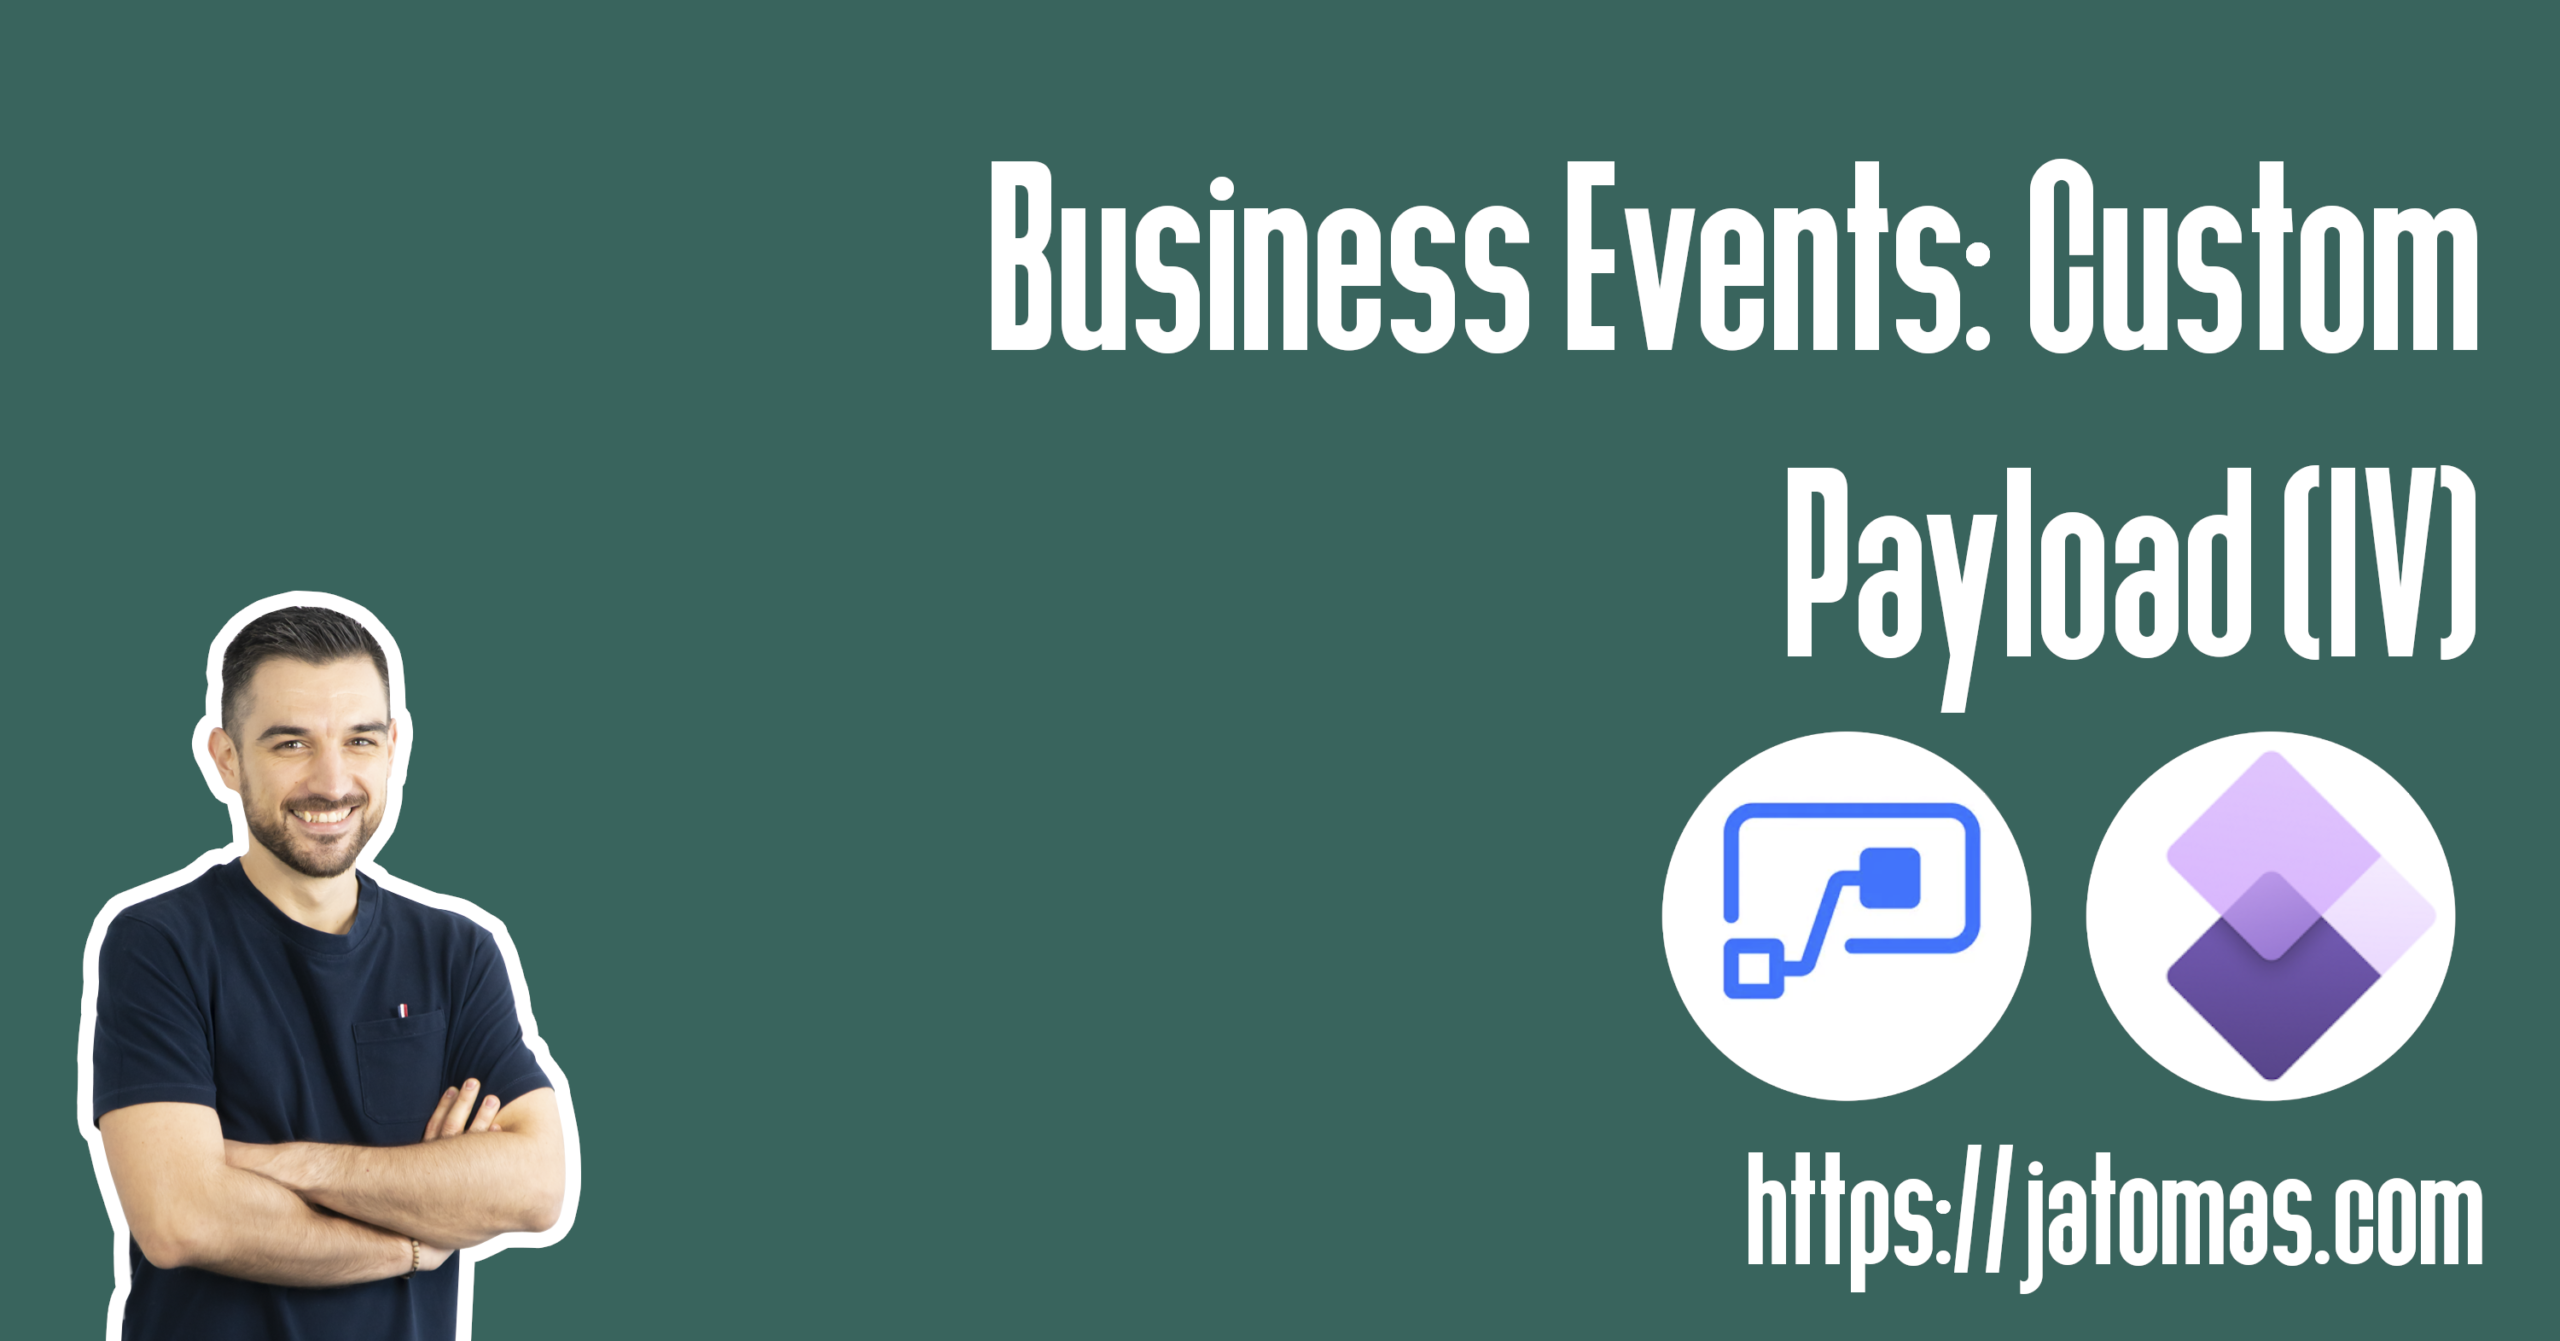 Business Events - Custom Payload (IV)